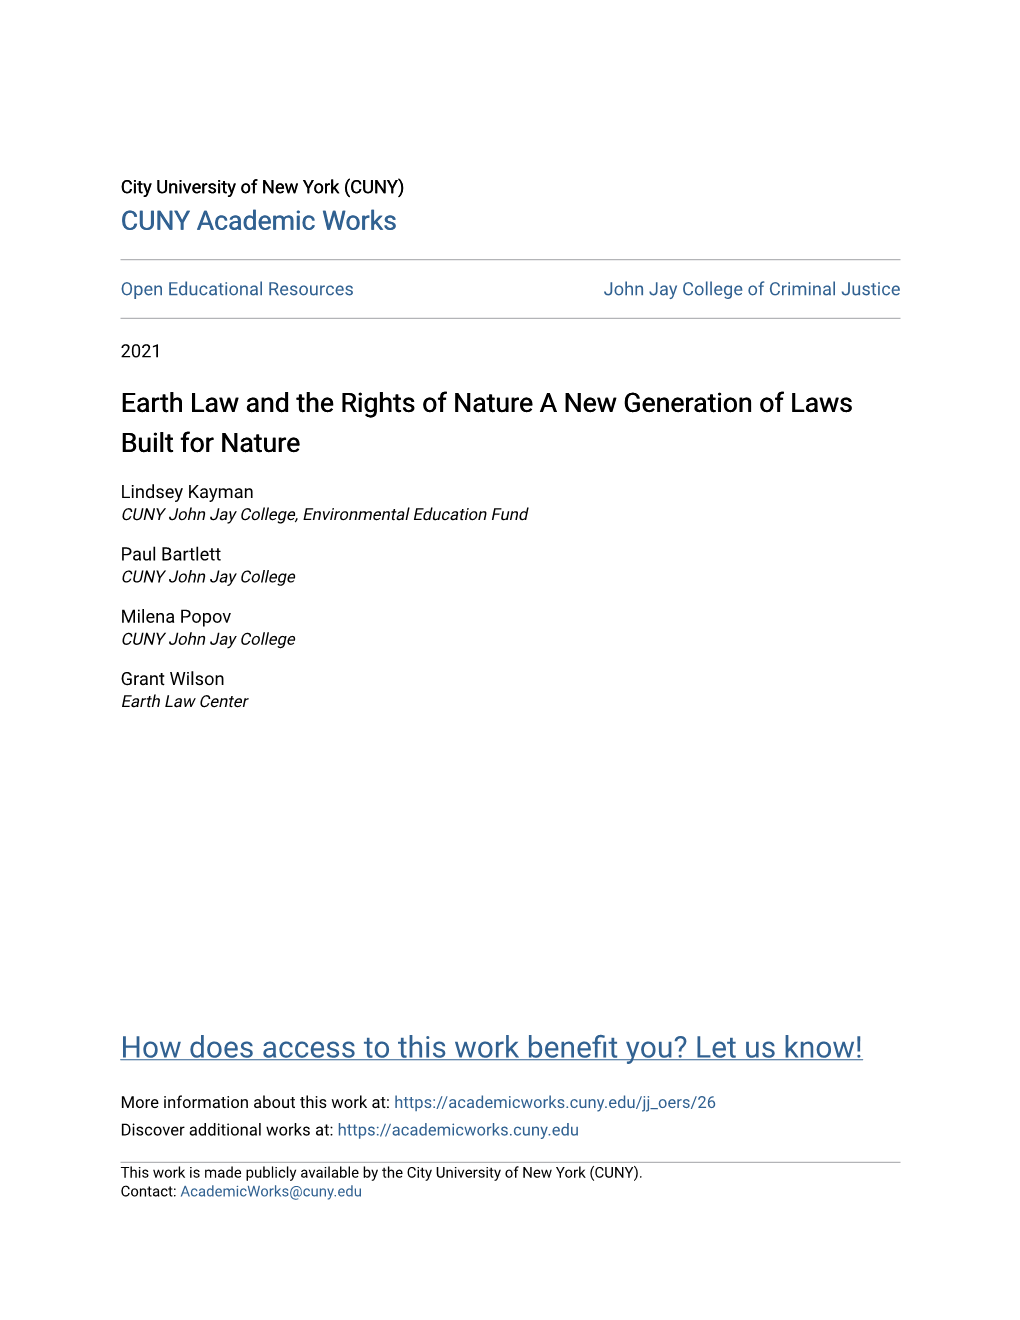 Earth Law and the Rights of Nature a New Generation of Laws Built for Nature